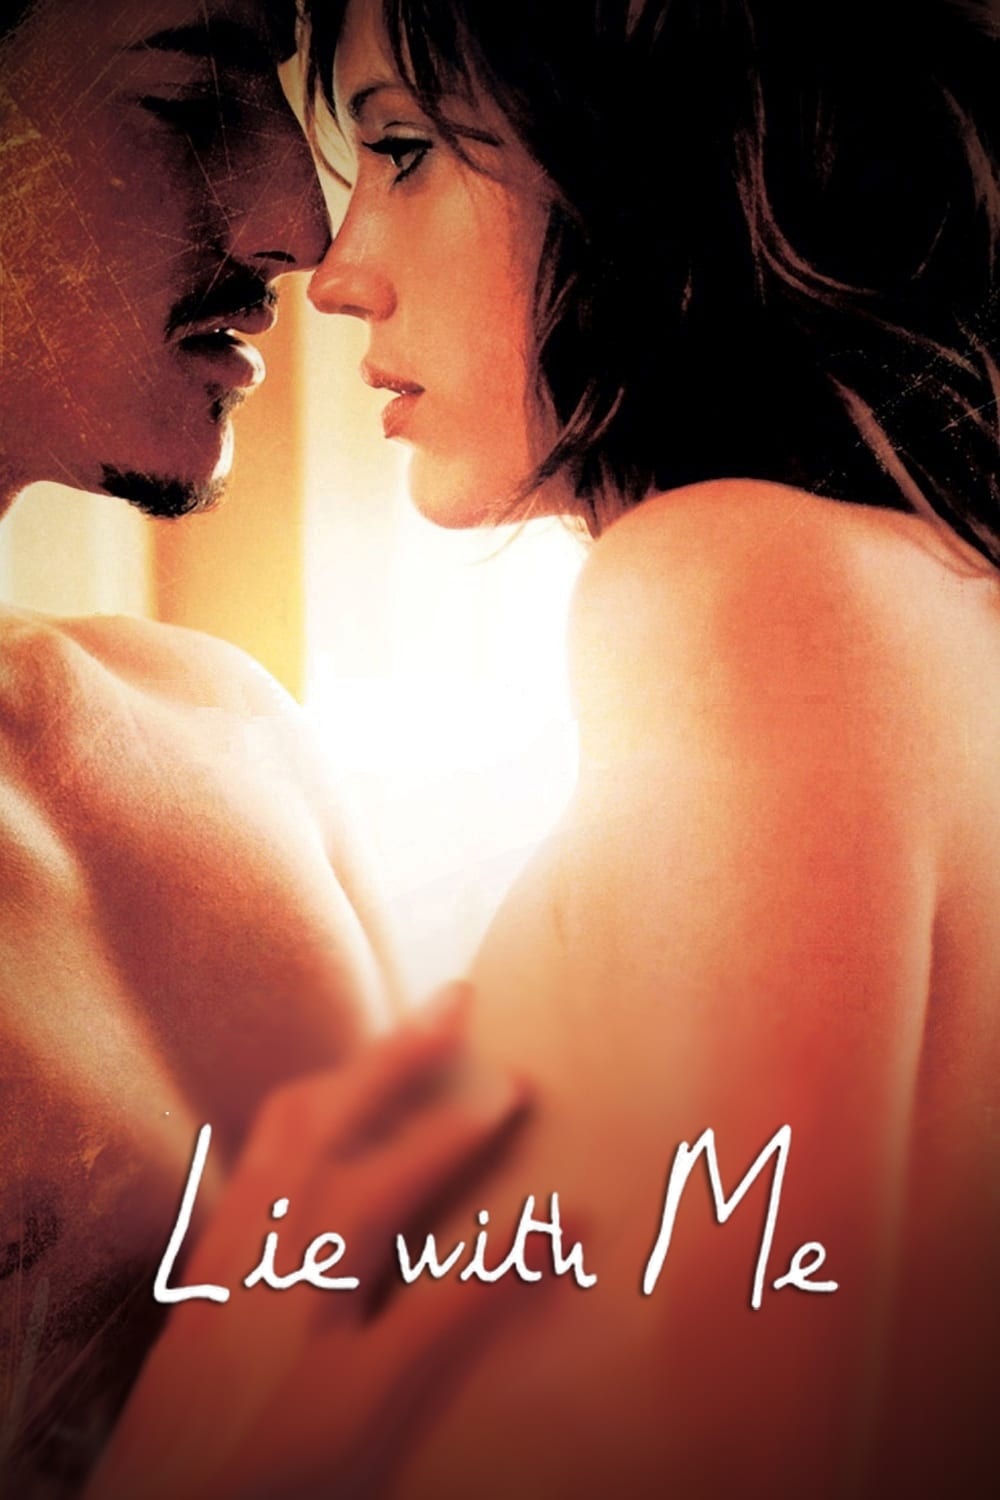 Lie with Me (2005)